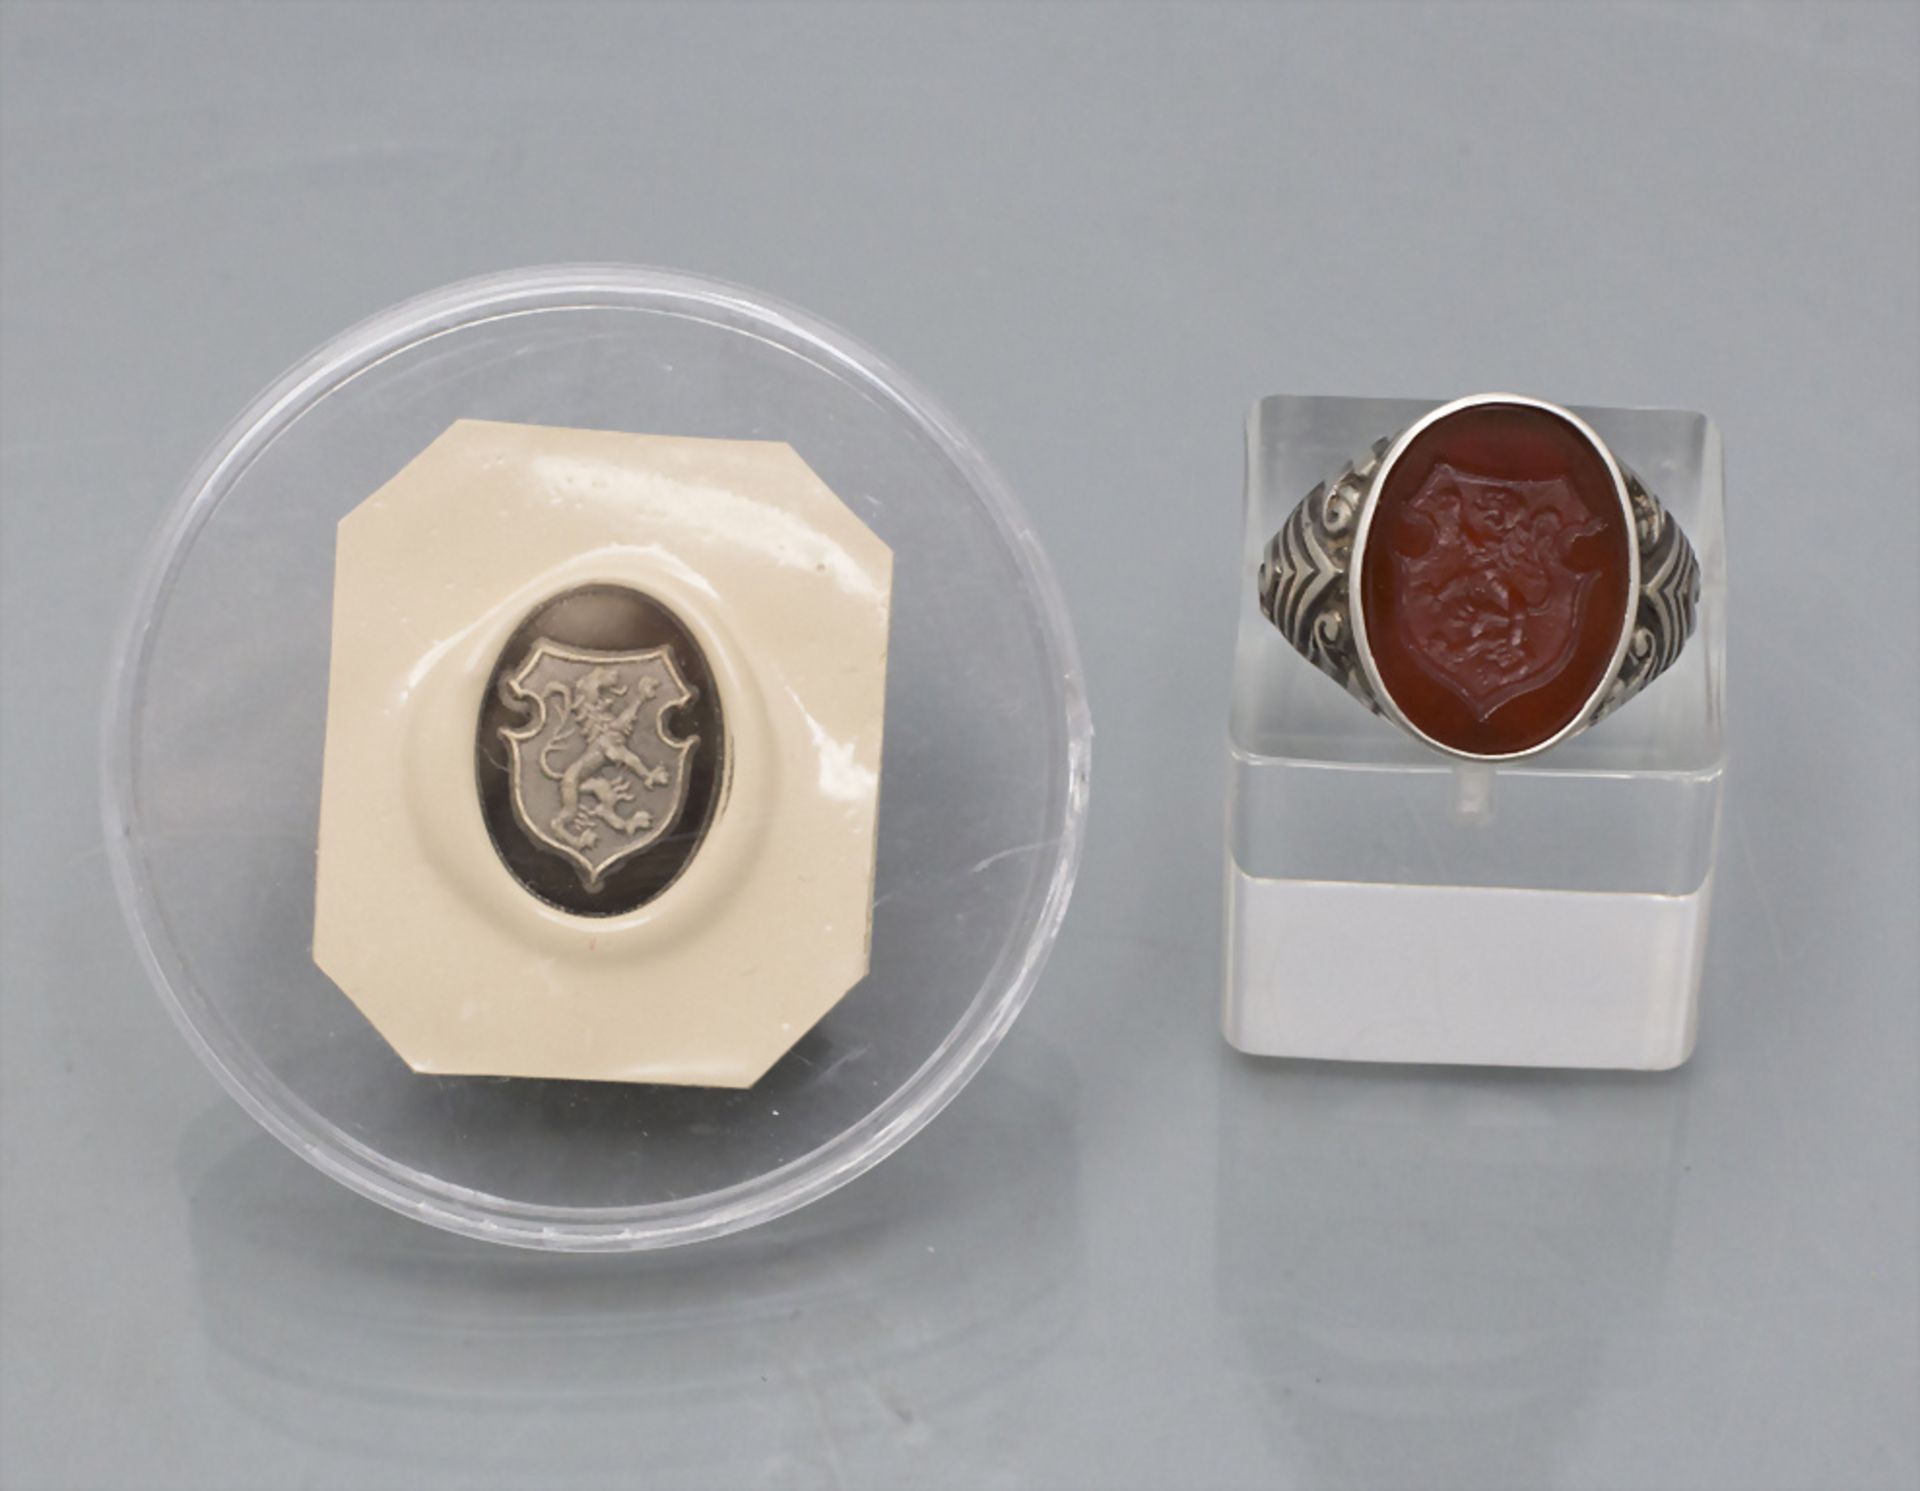 Siegelring / A silver seal ring, 20. Jh. - Image 2 of 2